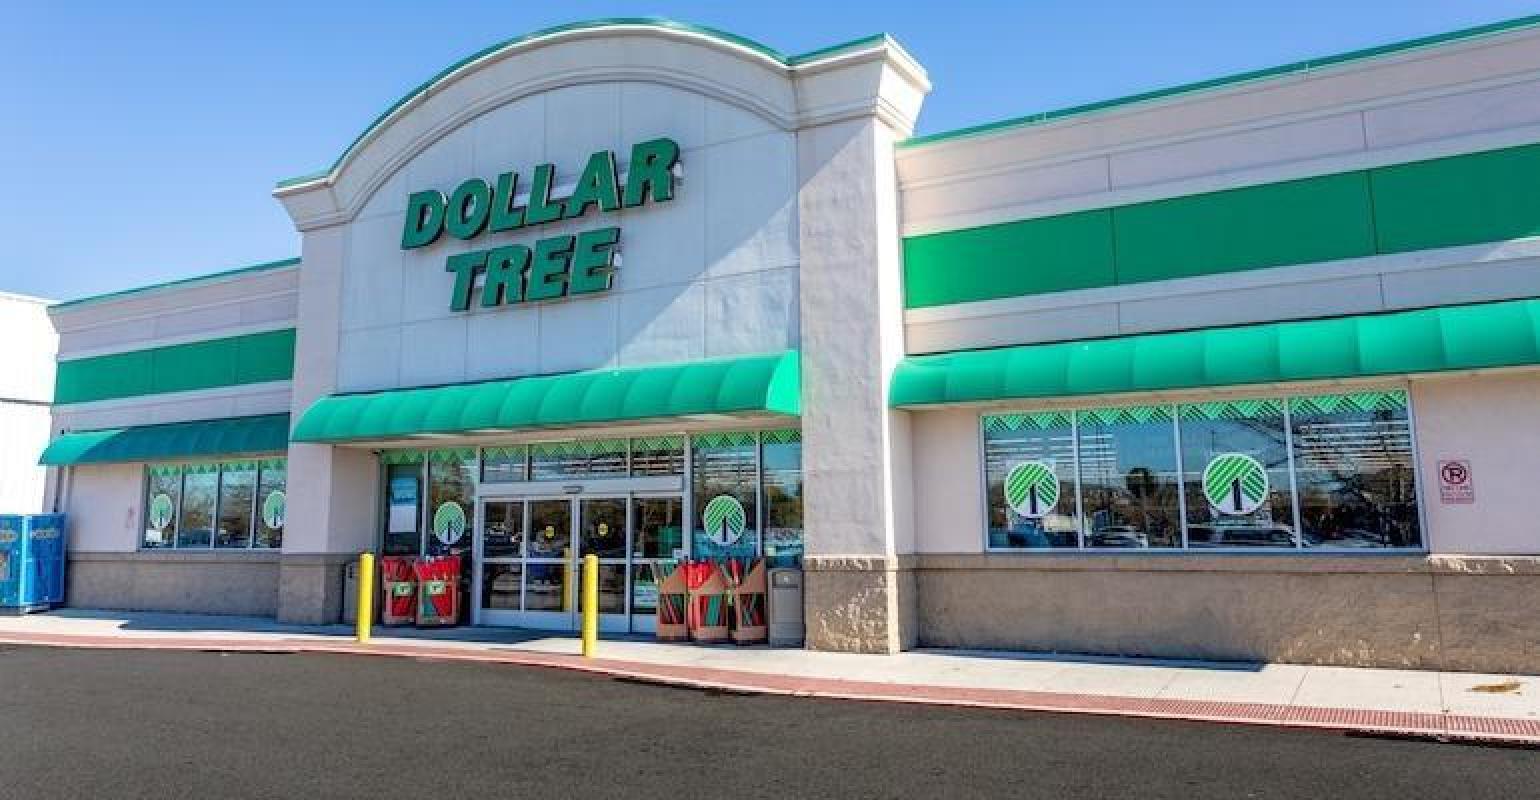 5 Dollar Tree Food Items That Are Cheaper Than Buying Takeout